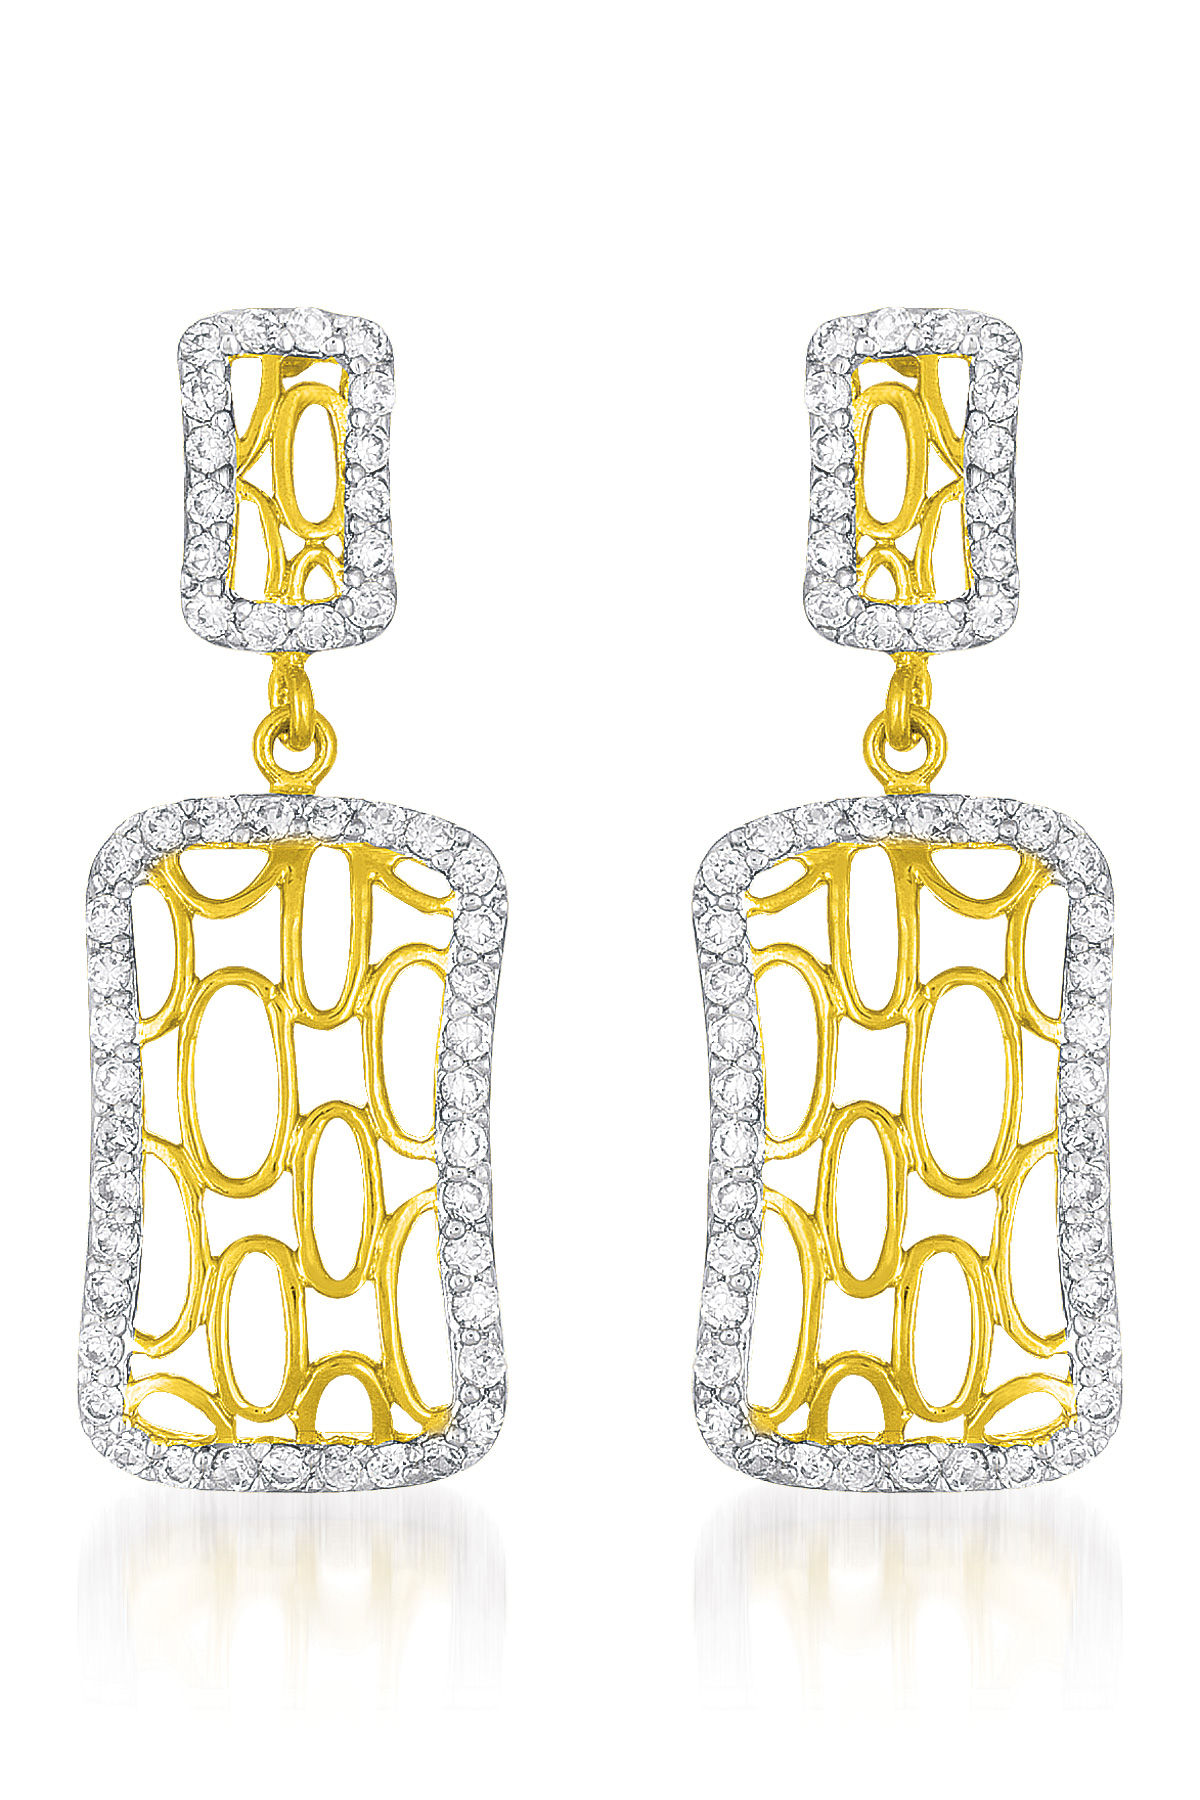 Cubic Zirconia (.925) Sterling Silver Two Tone Square Drop Earrings